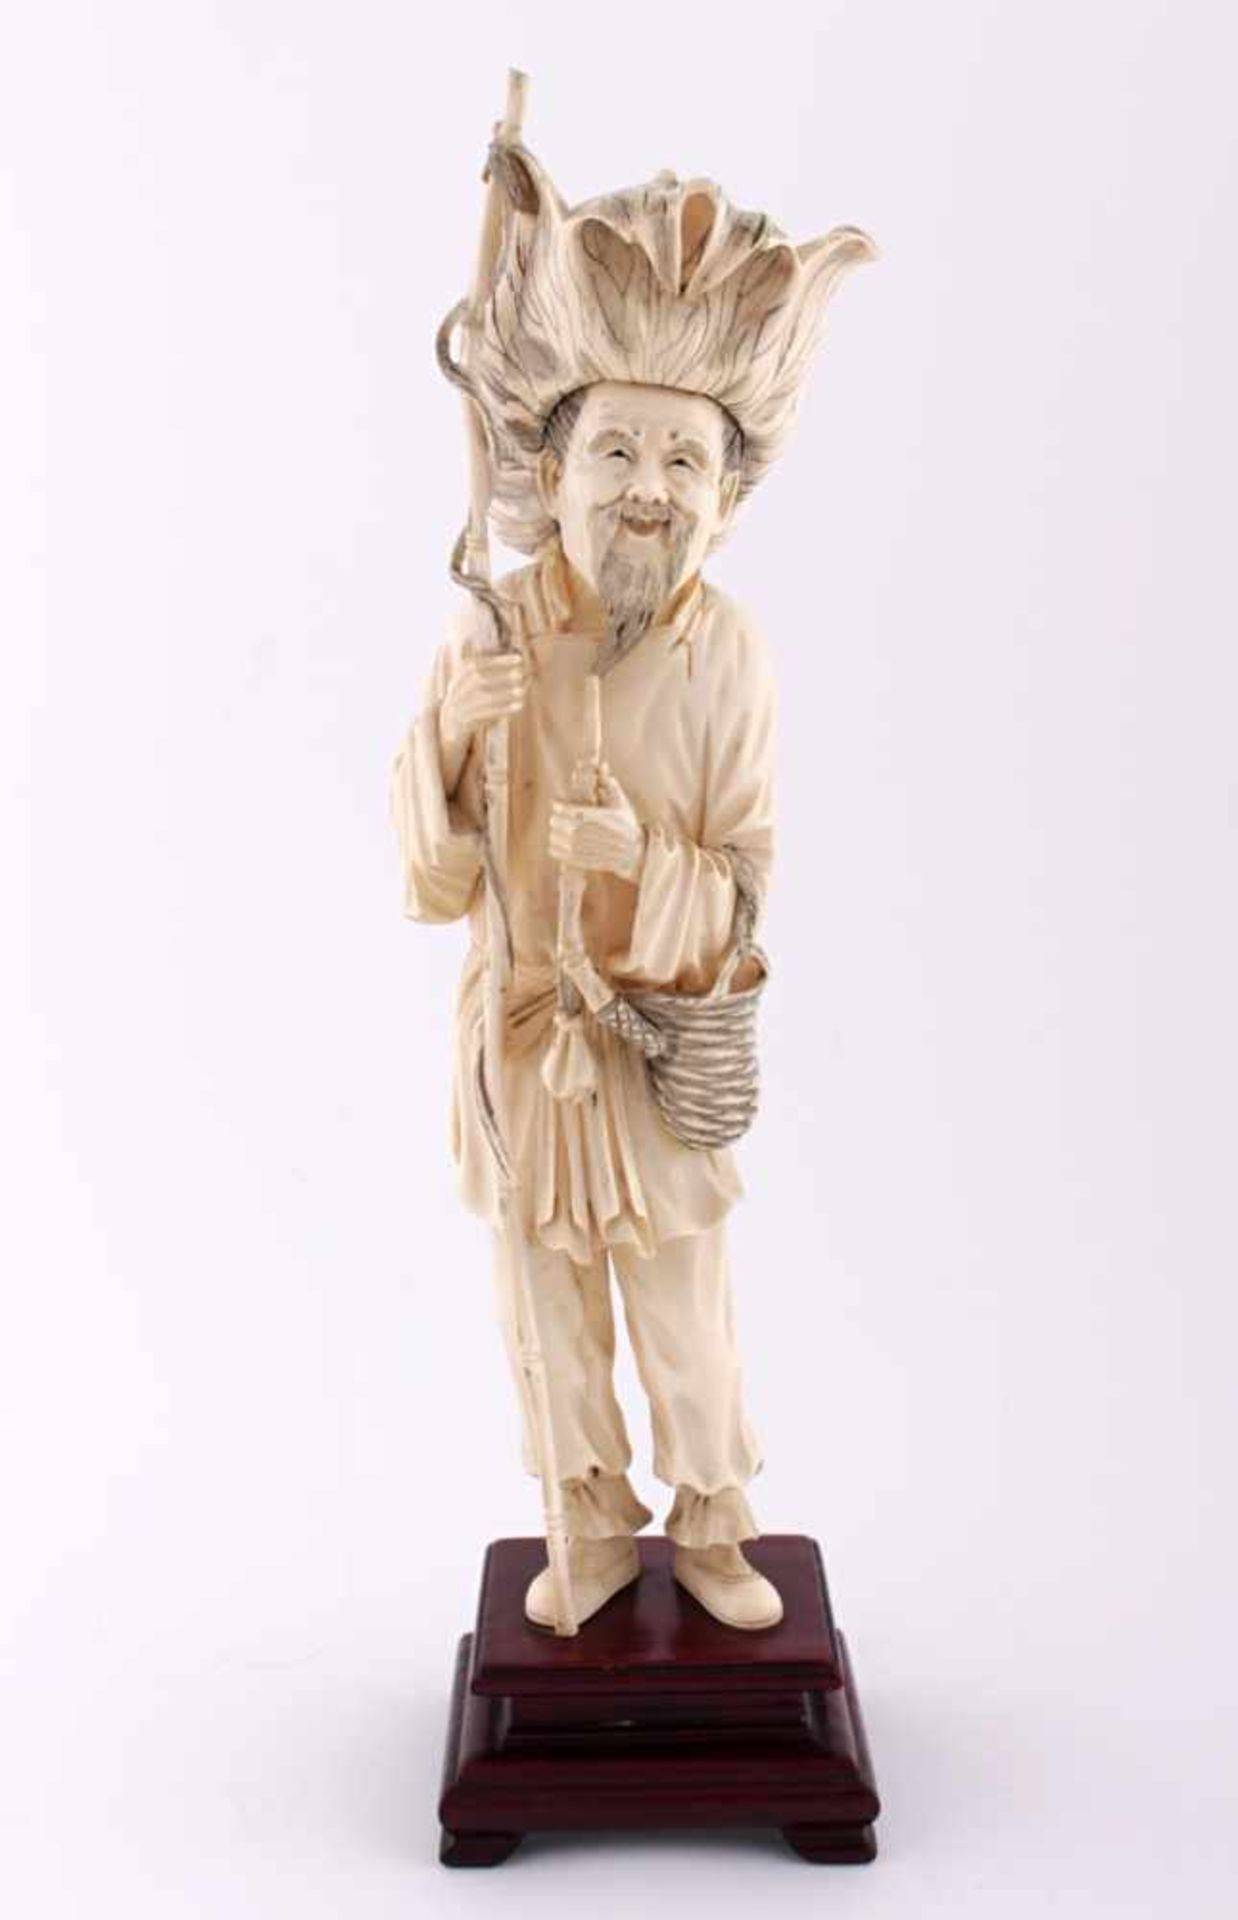 Chinese ivory fisherman statue China, early 20th century, ivory, a fisherman in a wide hat holding a